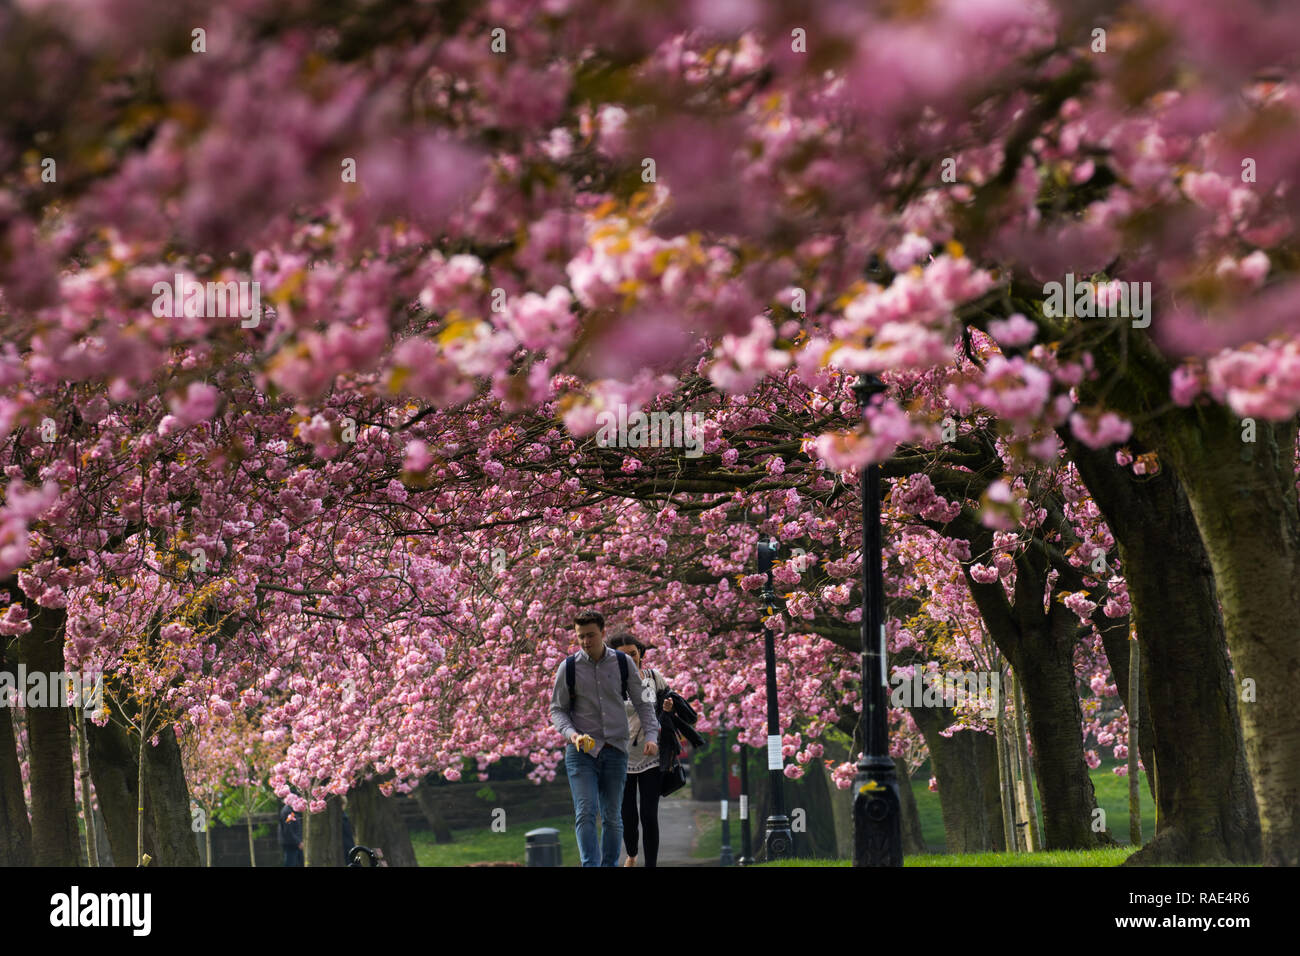 A view of rows of pink cherry blossom trees with two people walking beneath them provides a unique and memorable sight. Stray Rein, Harrogate, UK. Stock Photo